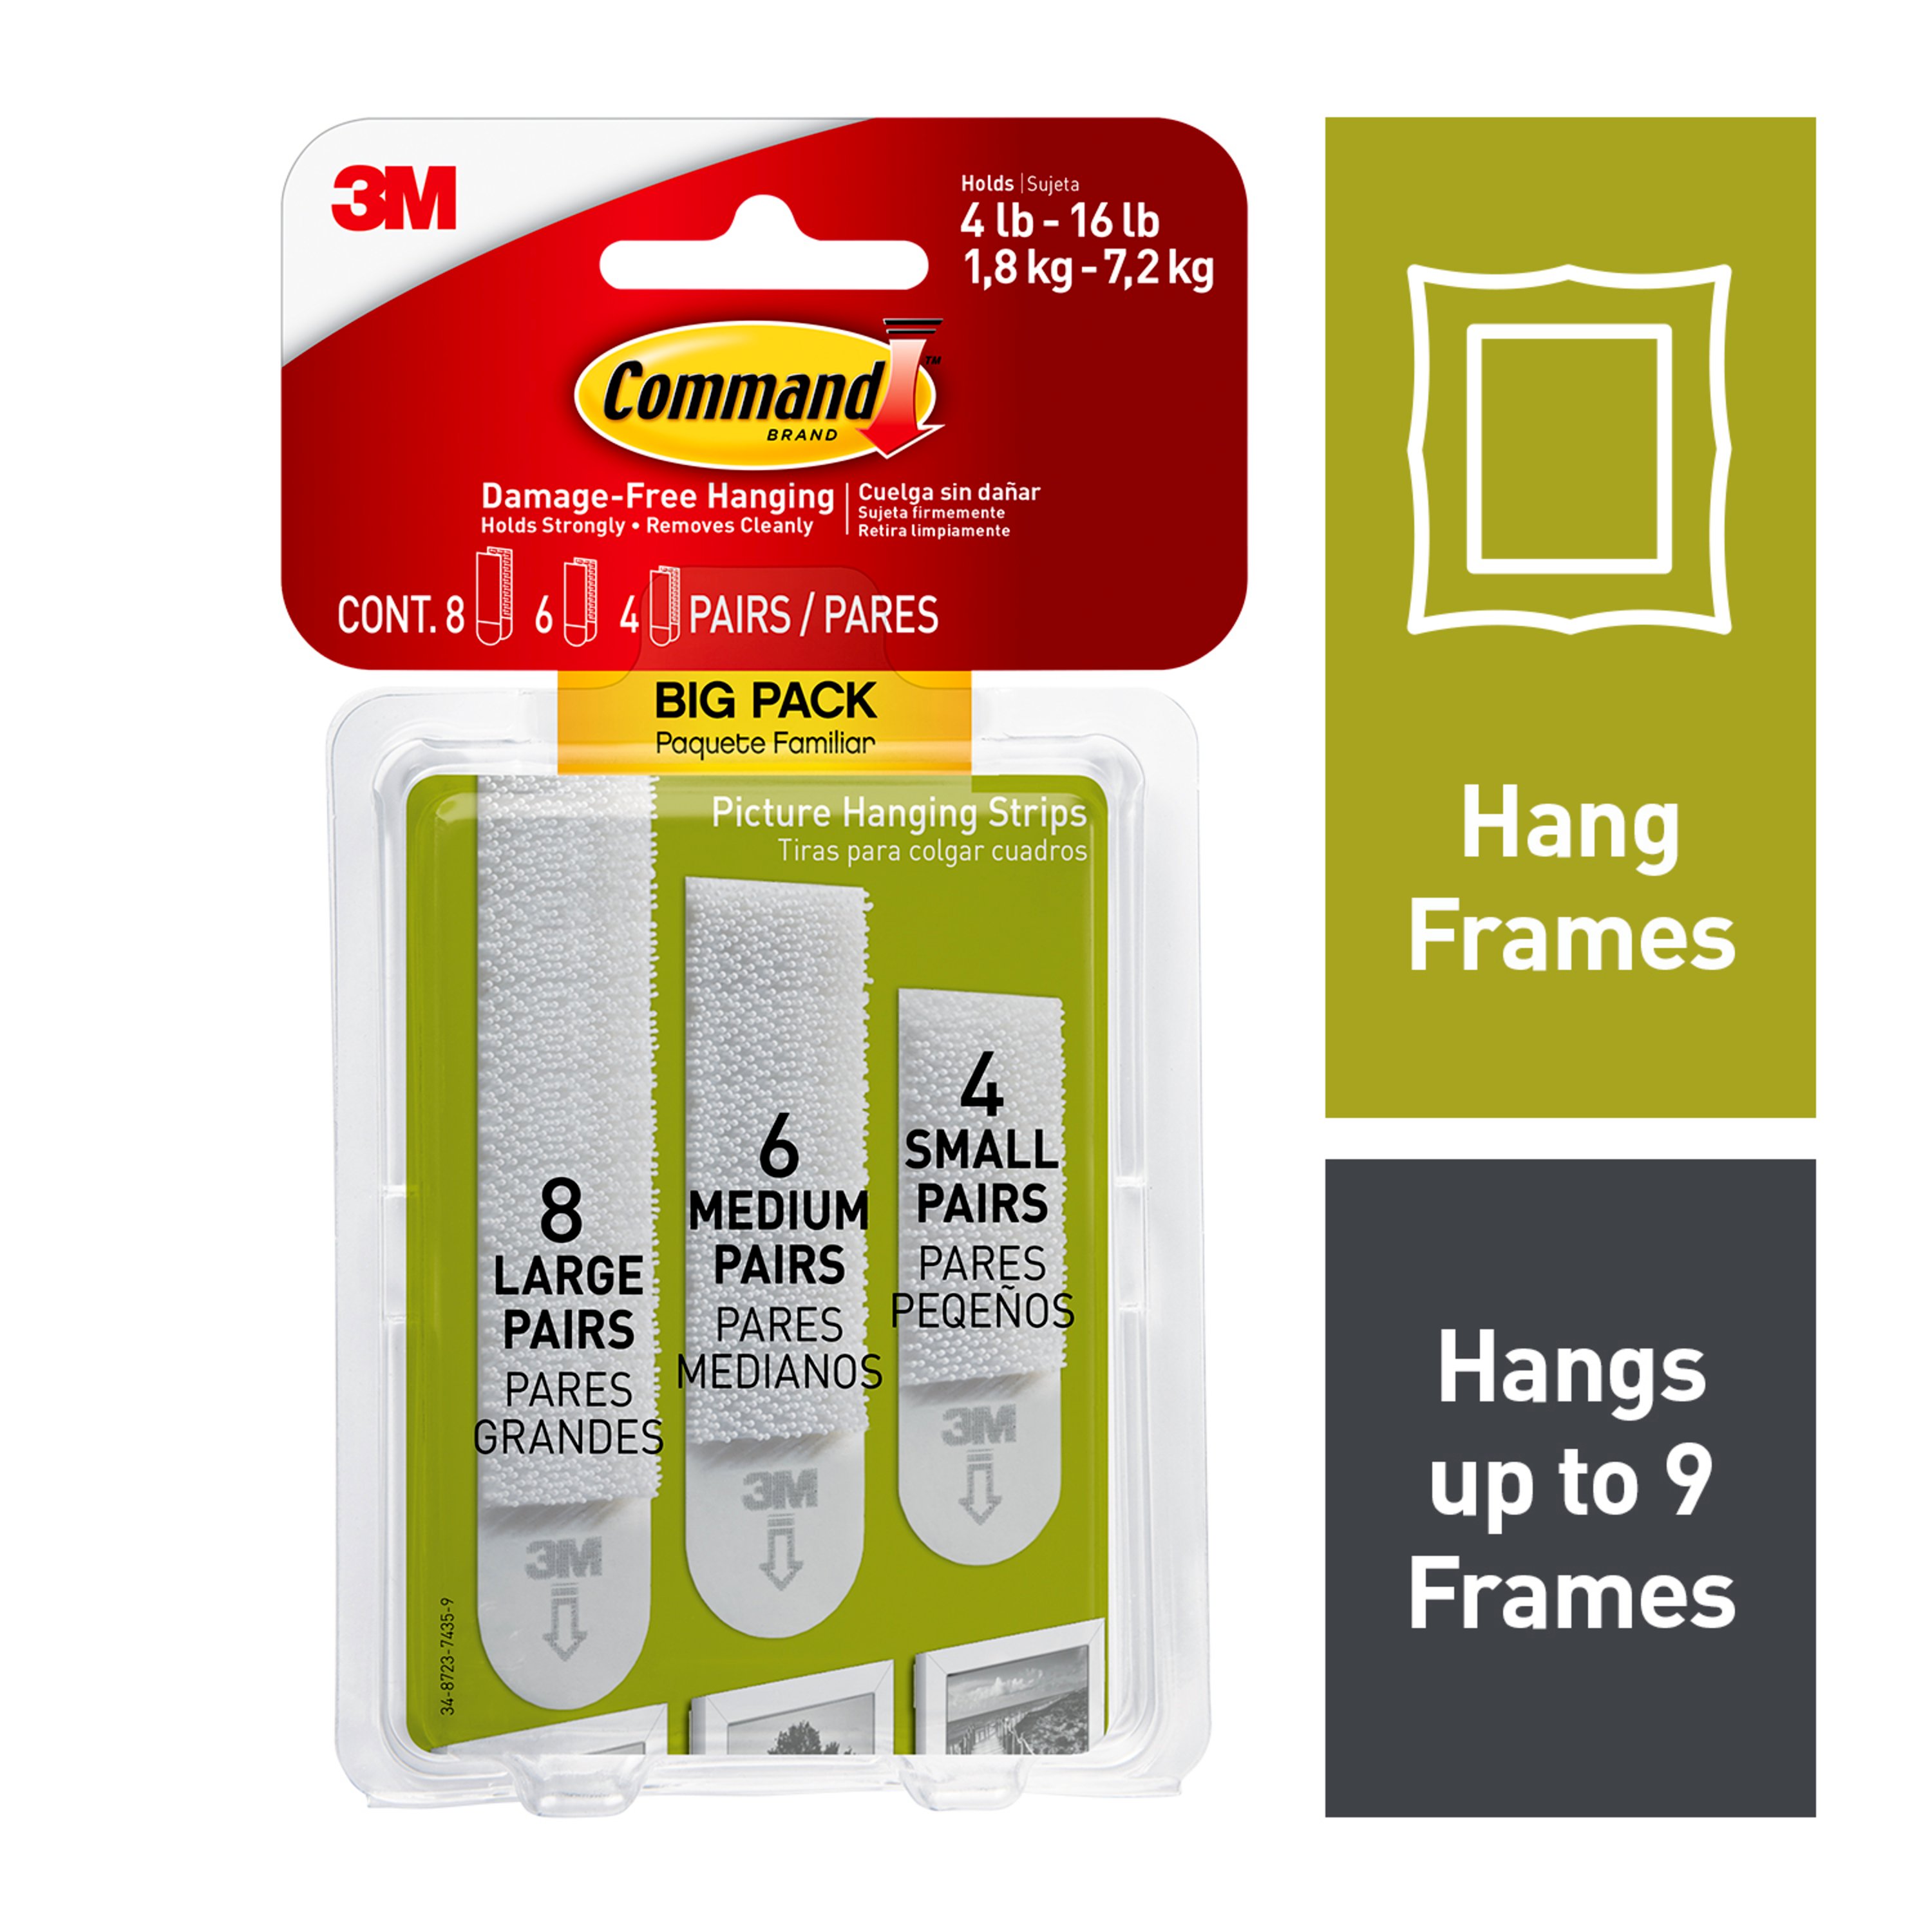 8 Pairs Large 2 Pack Command Picture Hanging Strips Value Pack 4 Pairs Medium